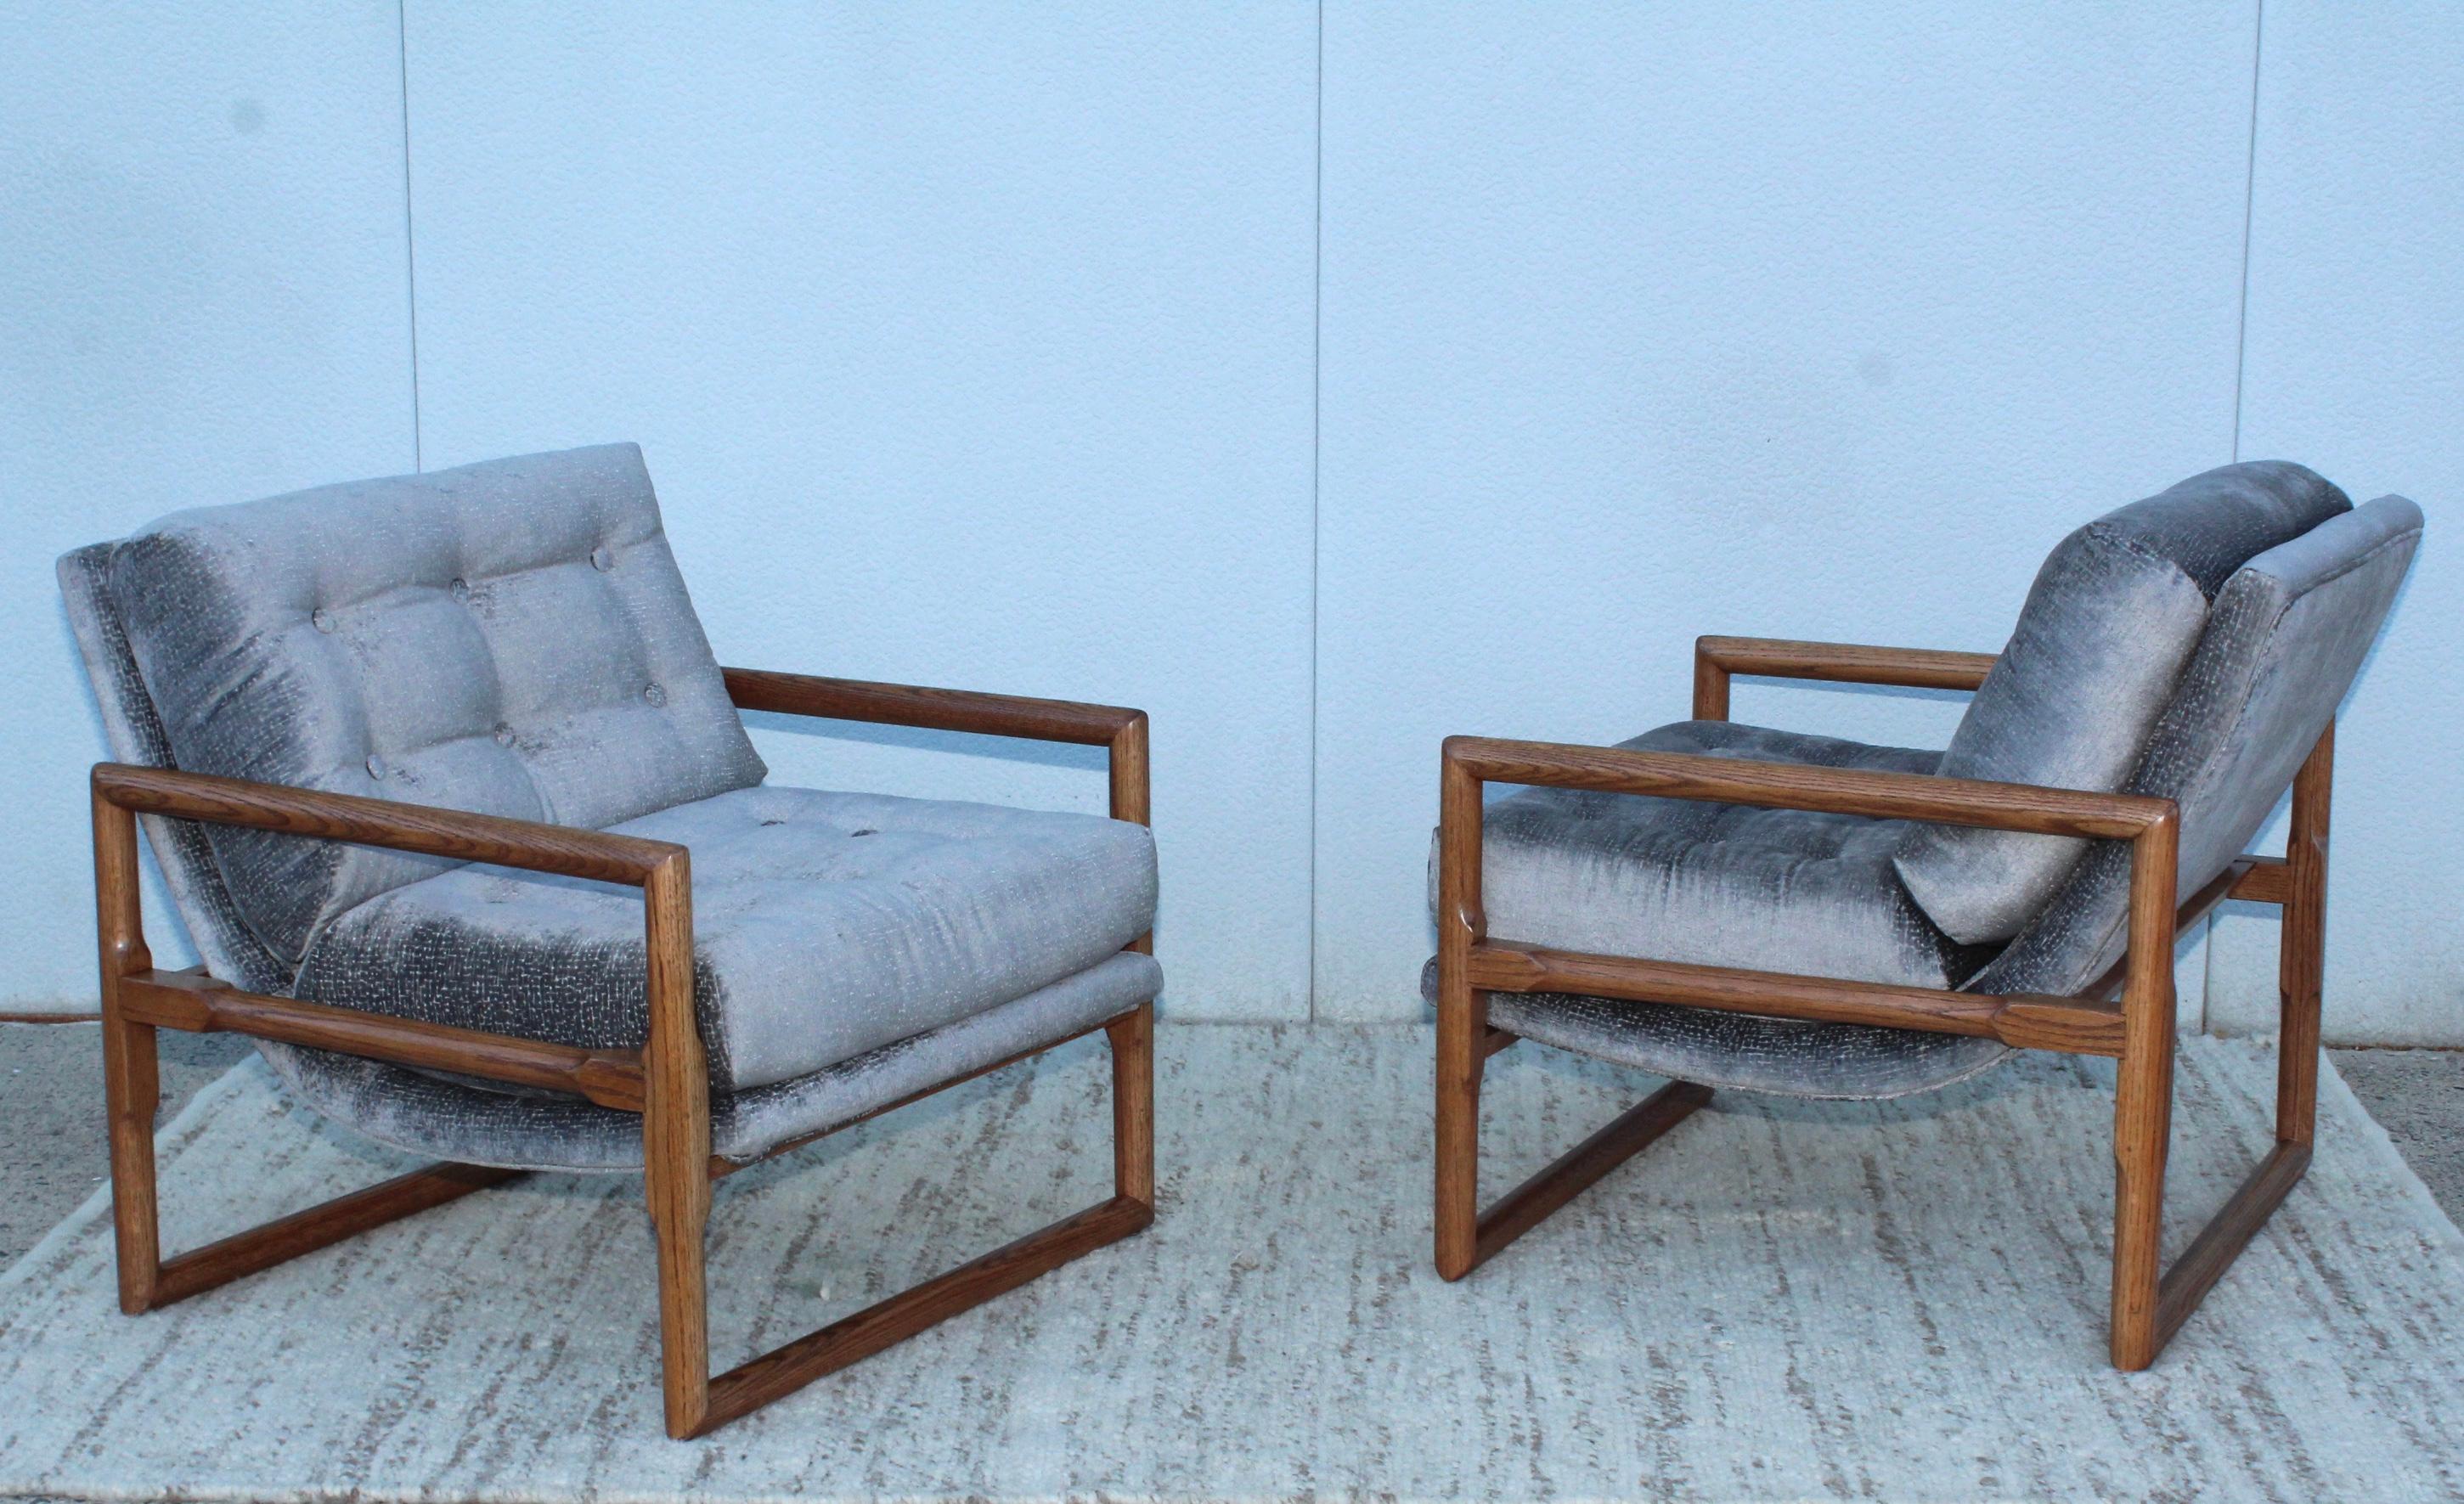 1960s Mid-Century Modern scoop seat lounge chairs with oak frame by Milo Baughman, newly restored and re-upholstered.